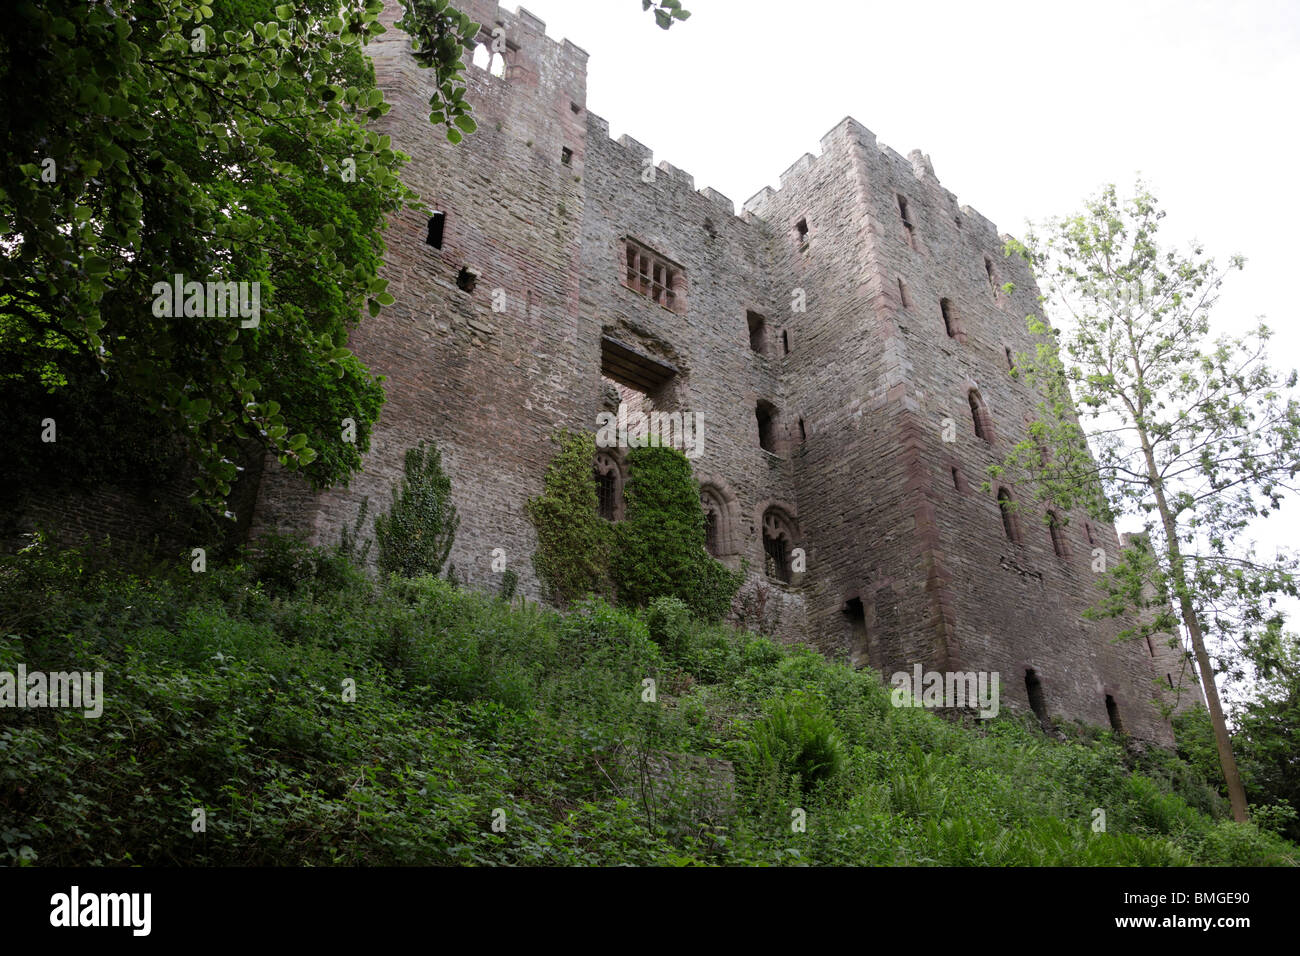 Ludlow Castle a medieval ruined castle home to major festivals throughout the year Ludlow Shropshire UK Stock Photo